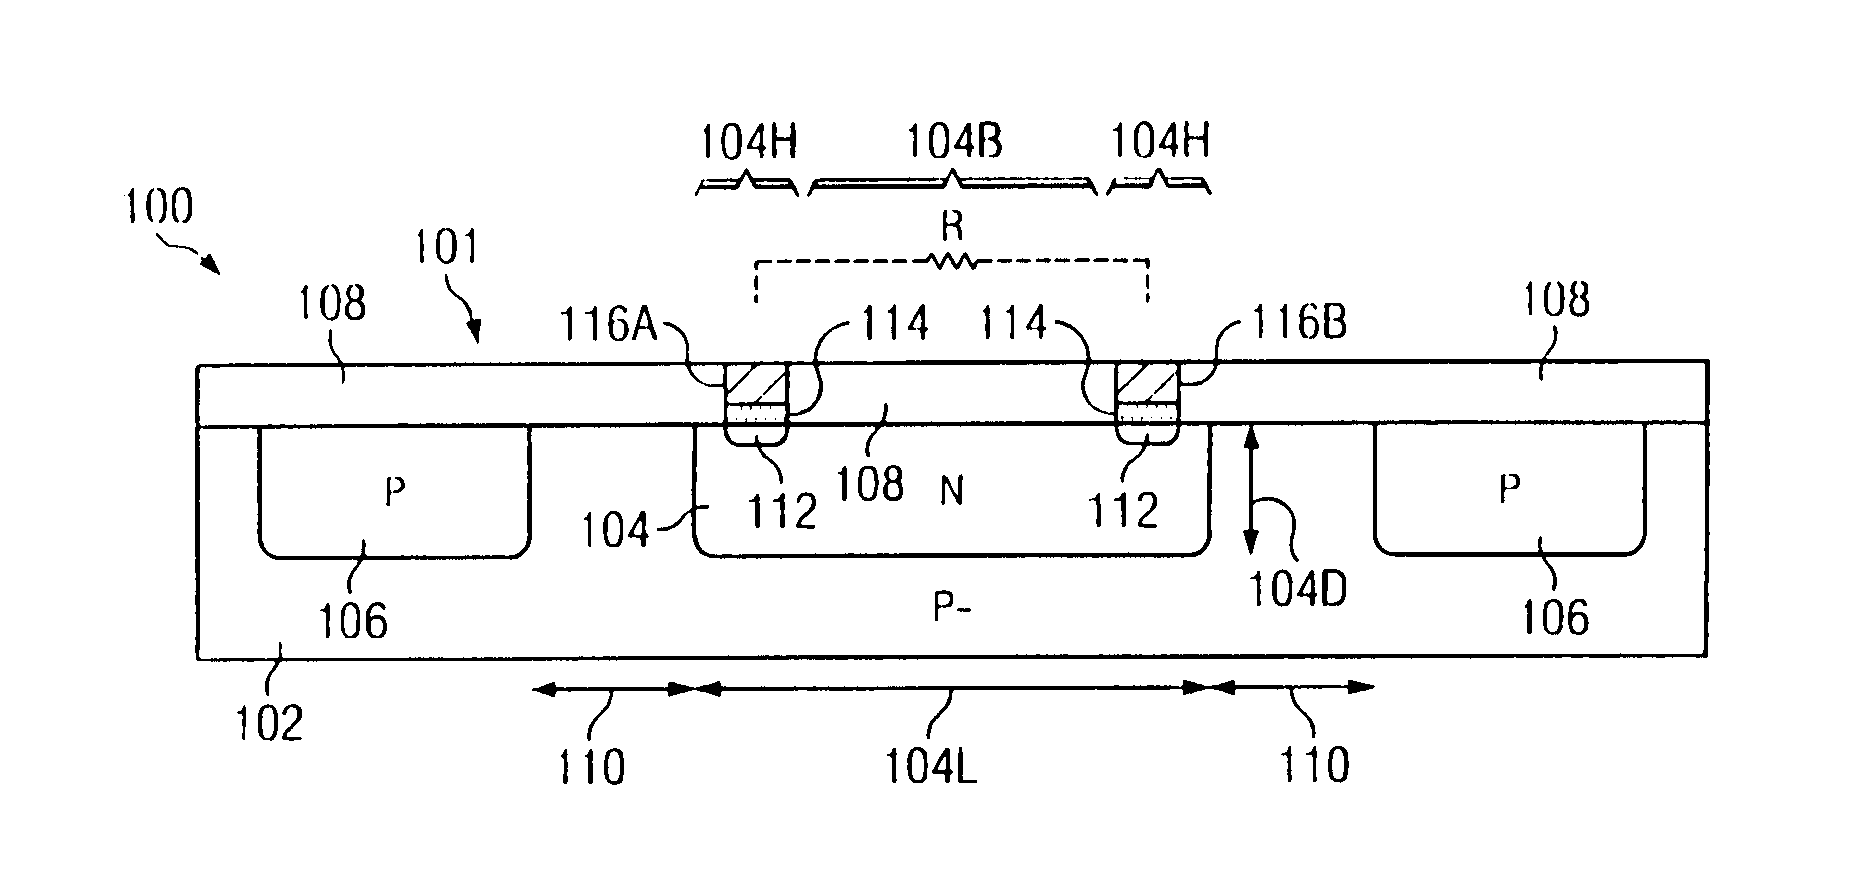 Diffusion resistor with reduced voltage coefficient of resistance and increased breakdown voltage using CMOS wells